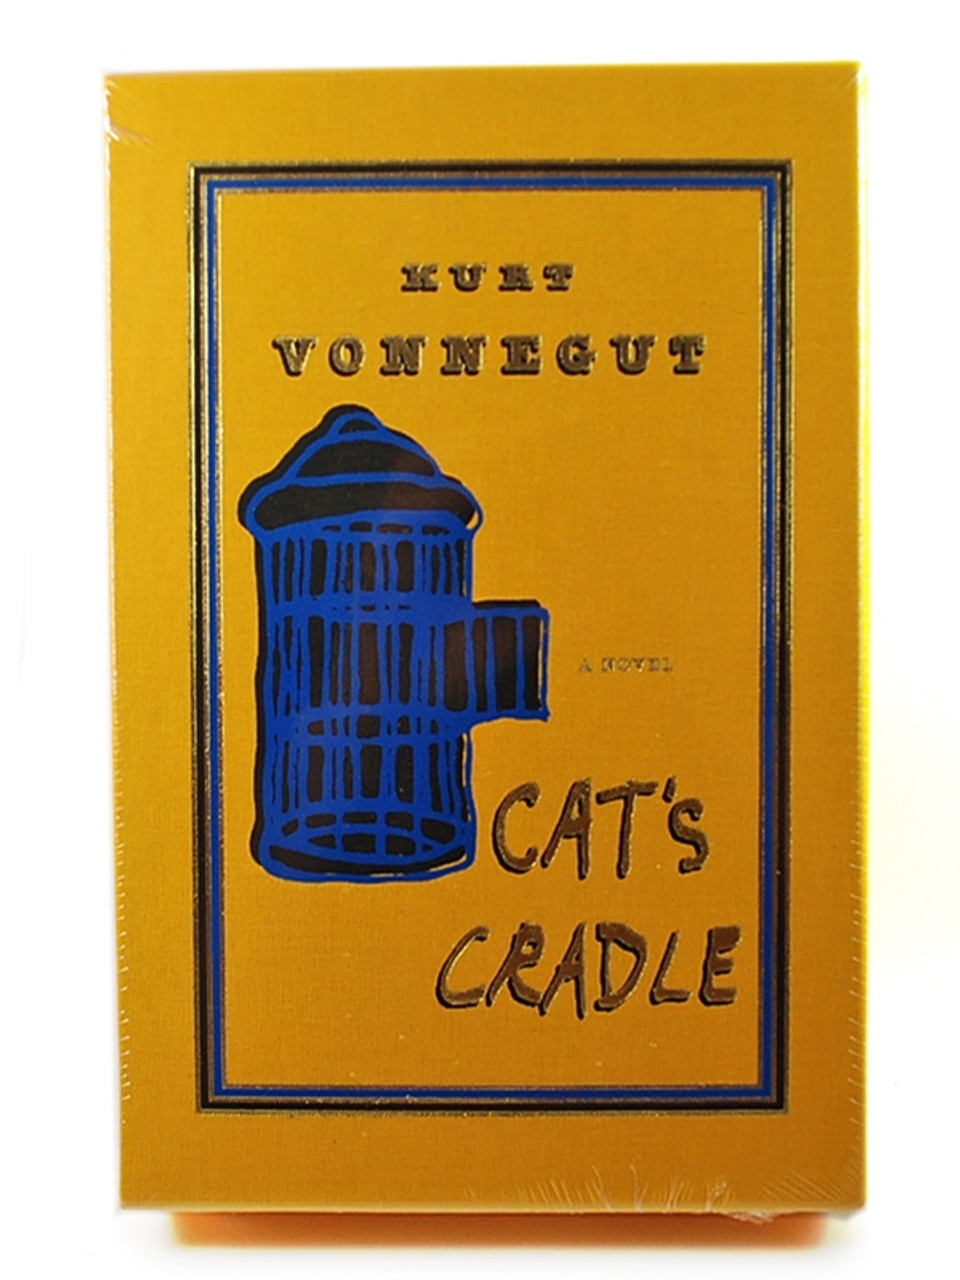 Easton Press, Kurt Vonnegut "Cat's Cradle" Signed Limited Deluxe Edition of only 500